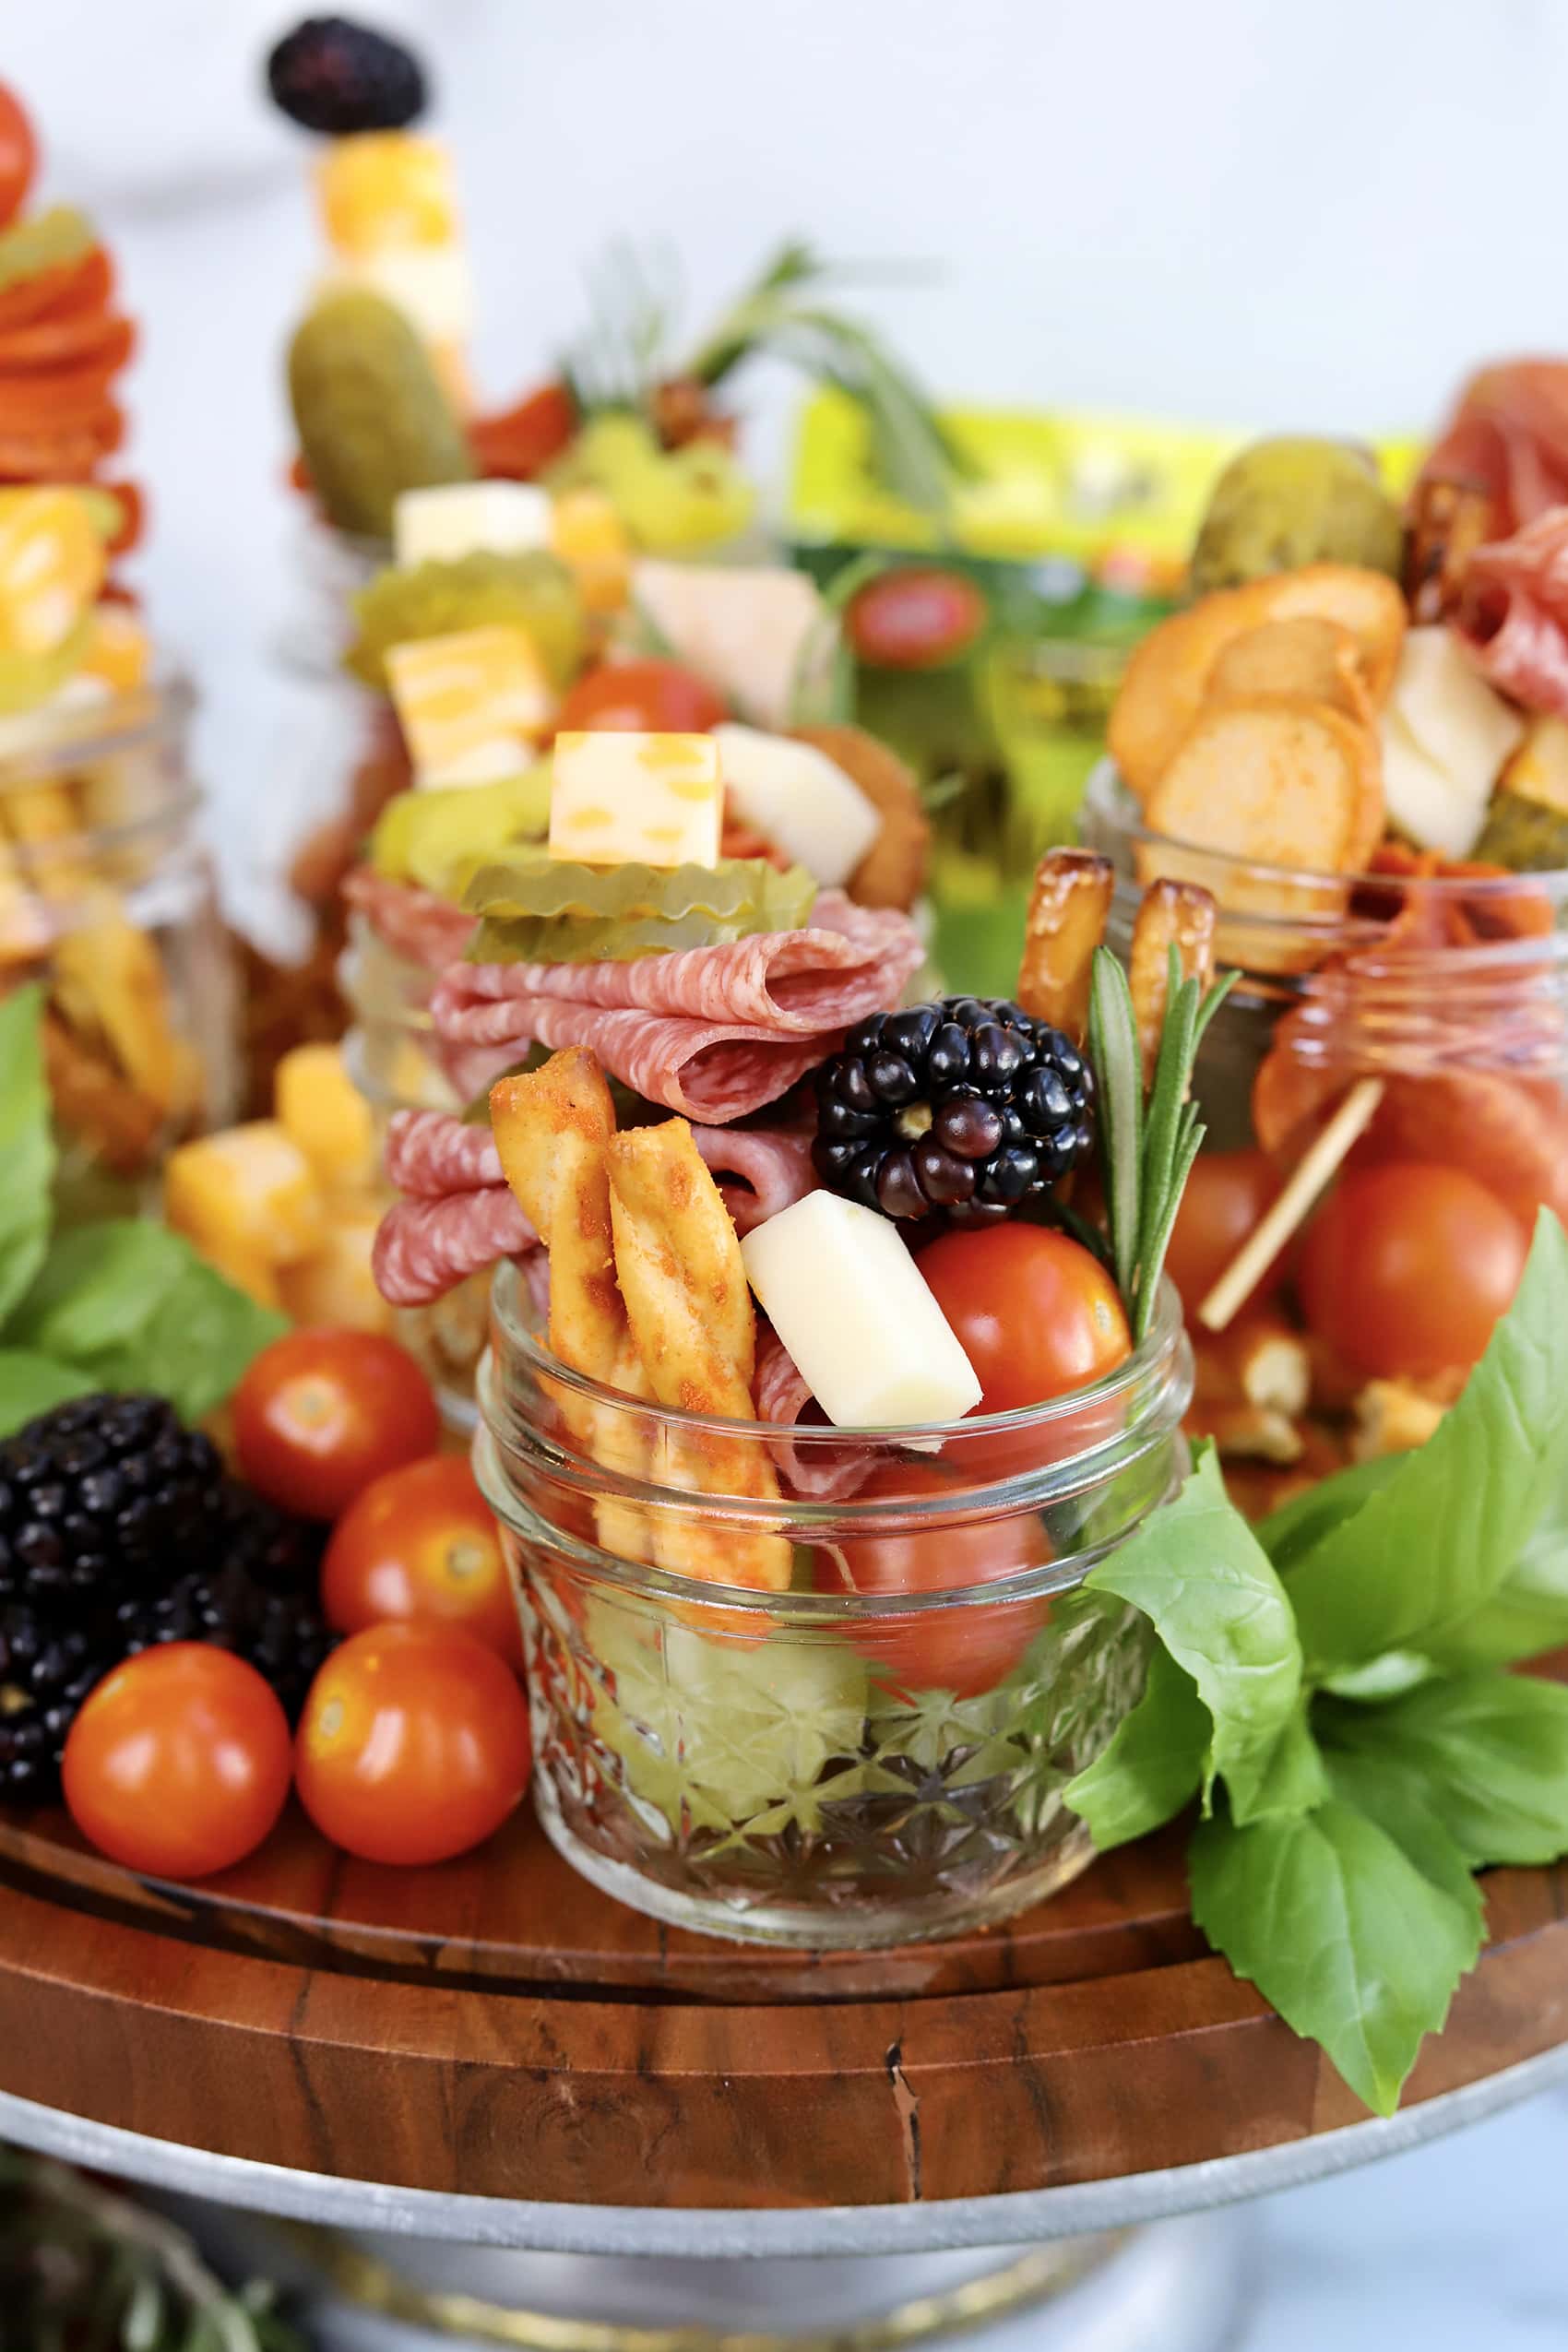 small glass jar filled with pretzels, berries pickles, cheese and tomatoes shown on wooden display board surrounded by charcuterie